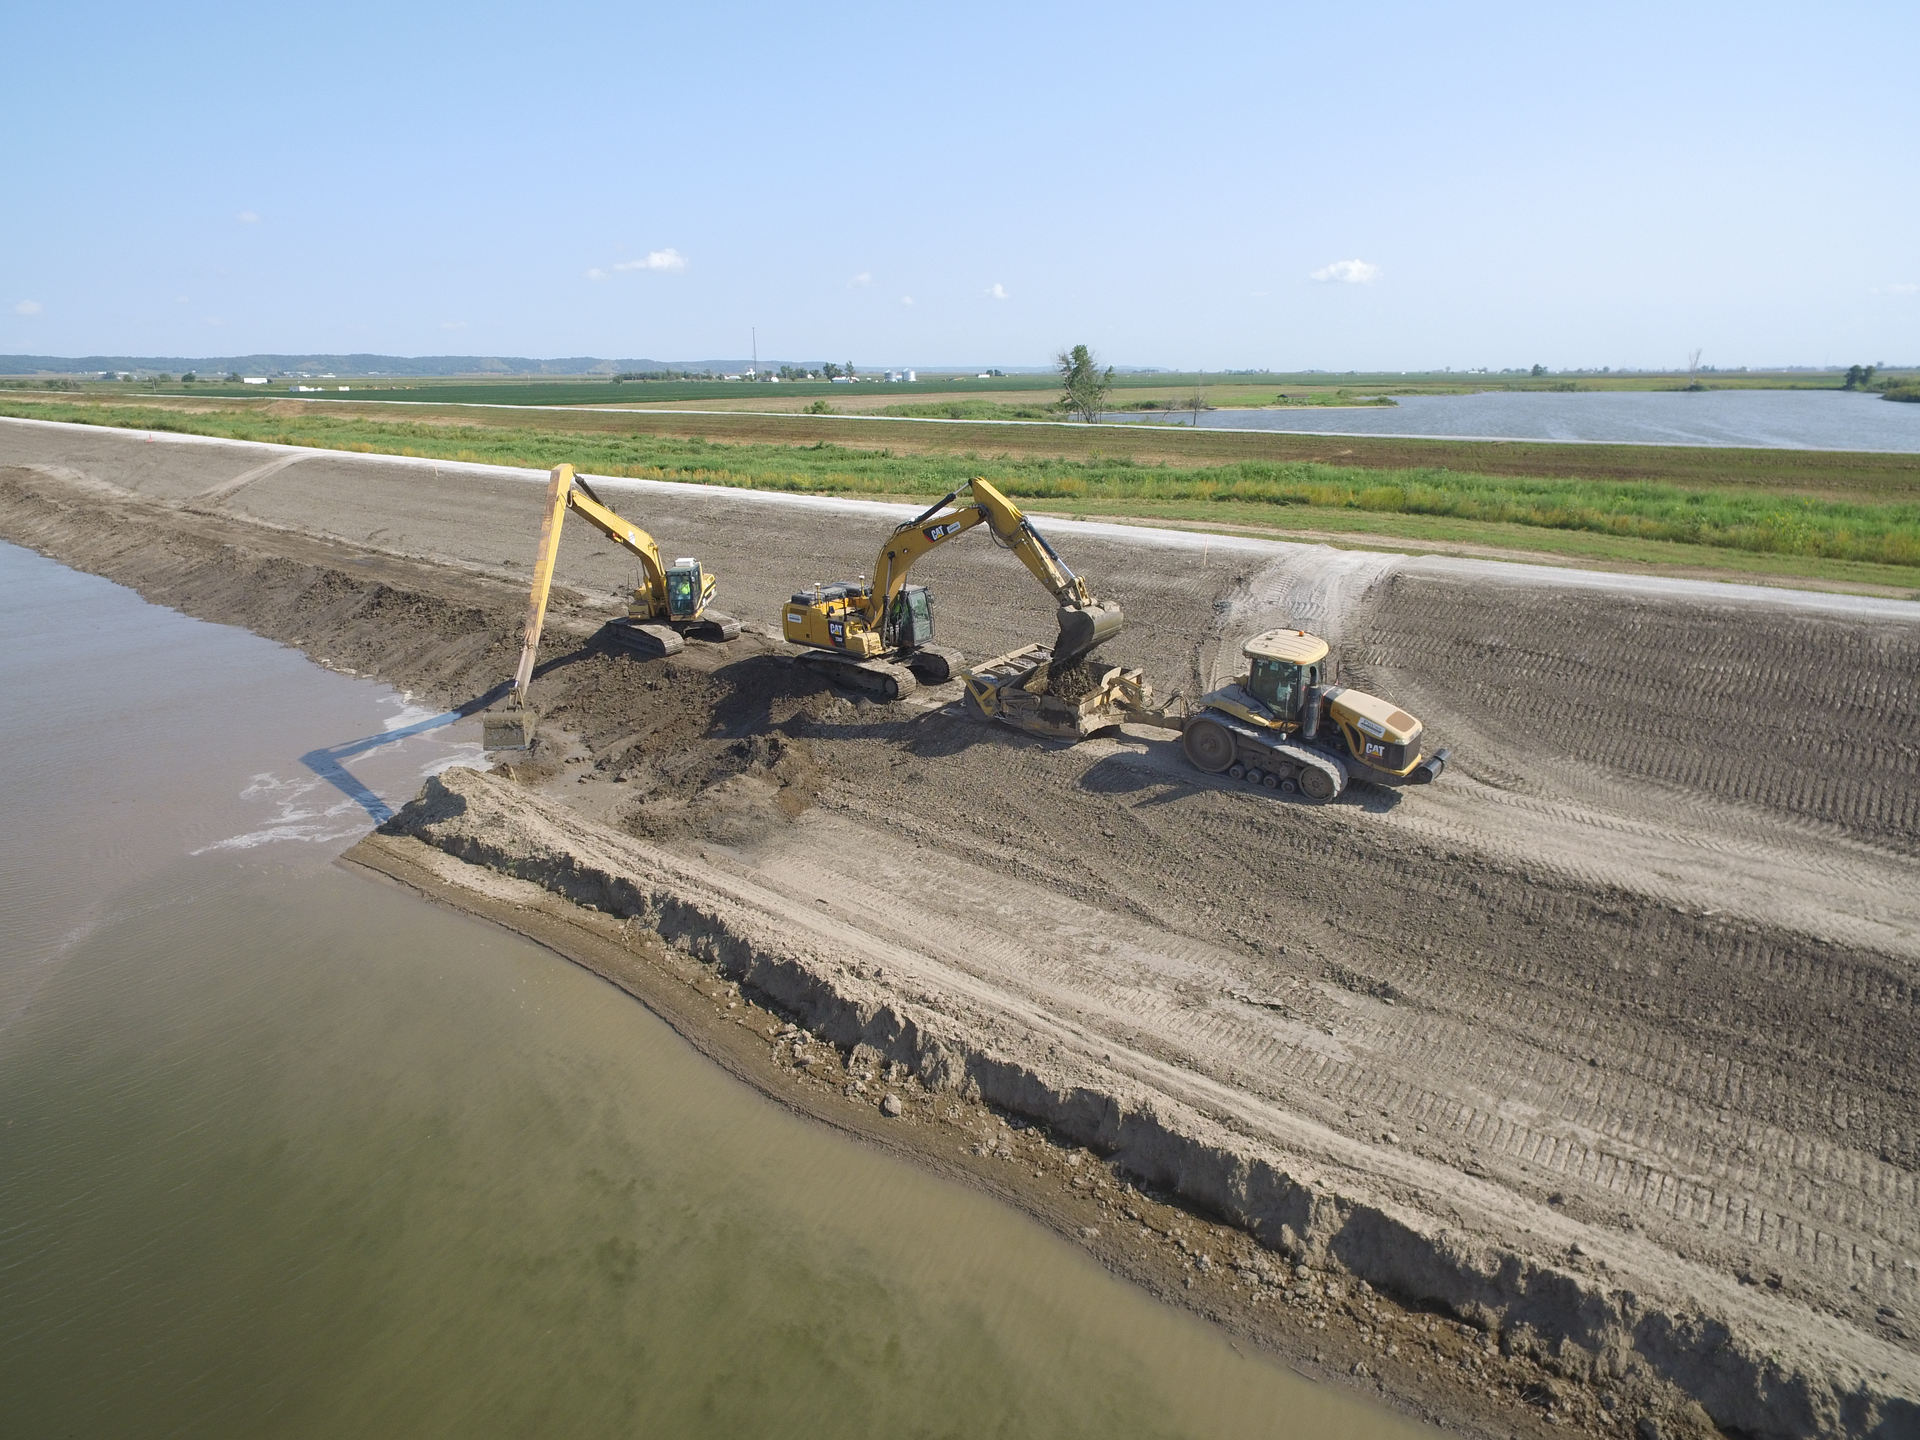 The 2011 and 2019 Nebraska floods helped Pruss Excavation up its equipment fleet and project management skills.